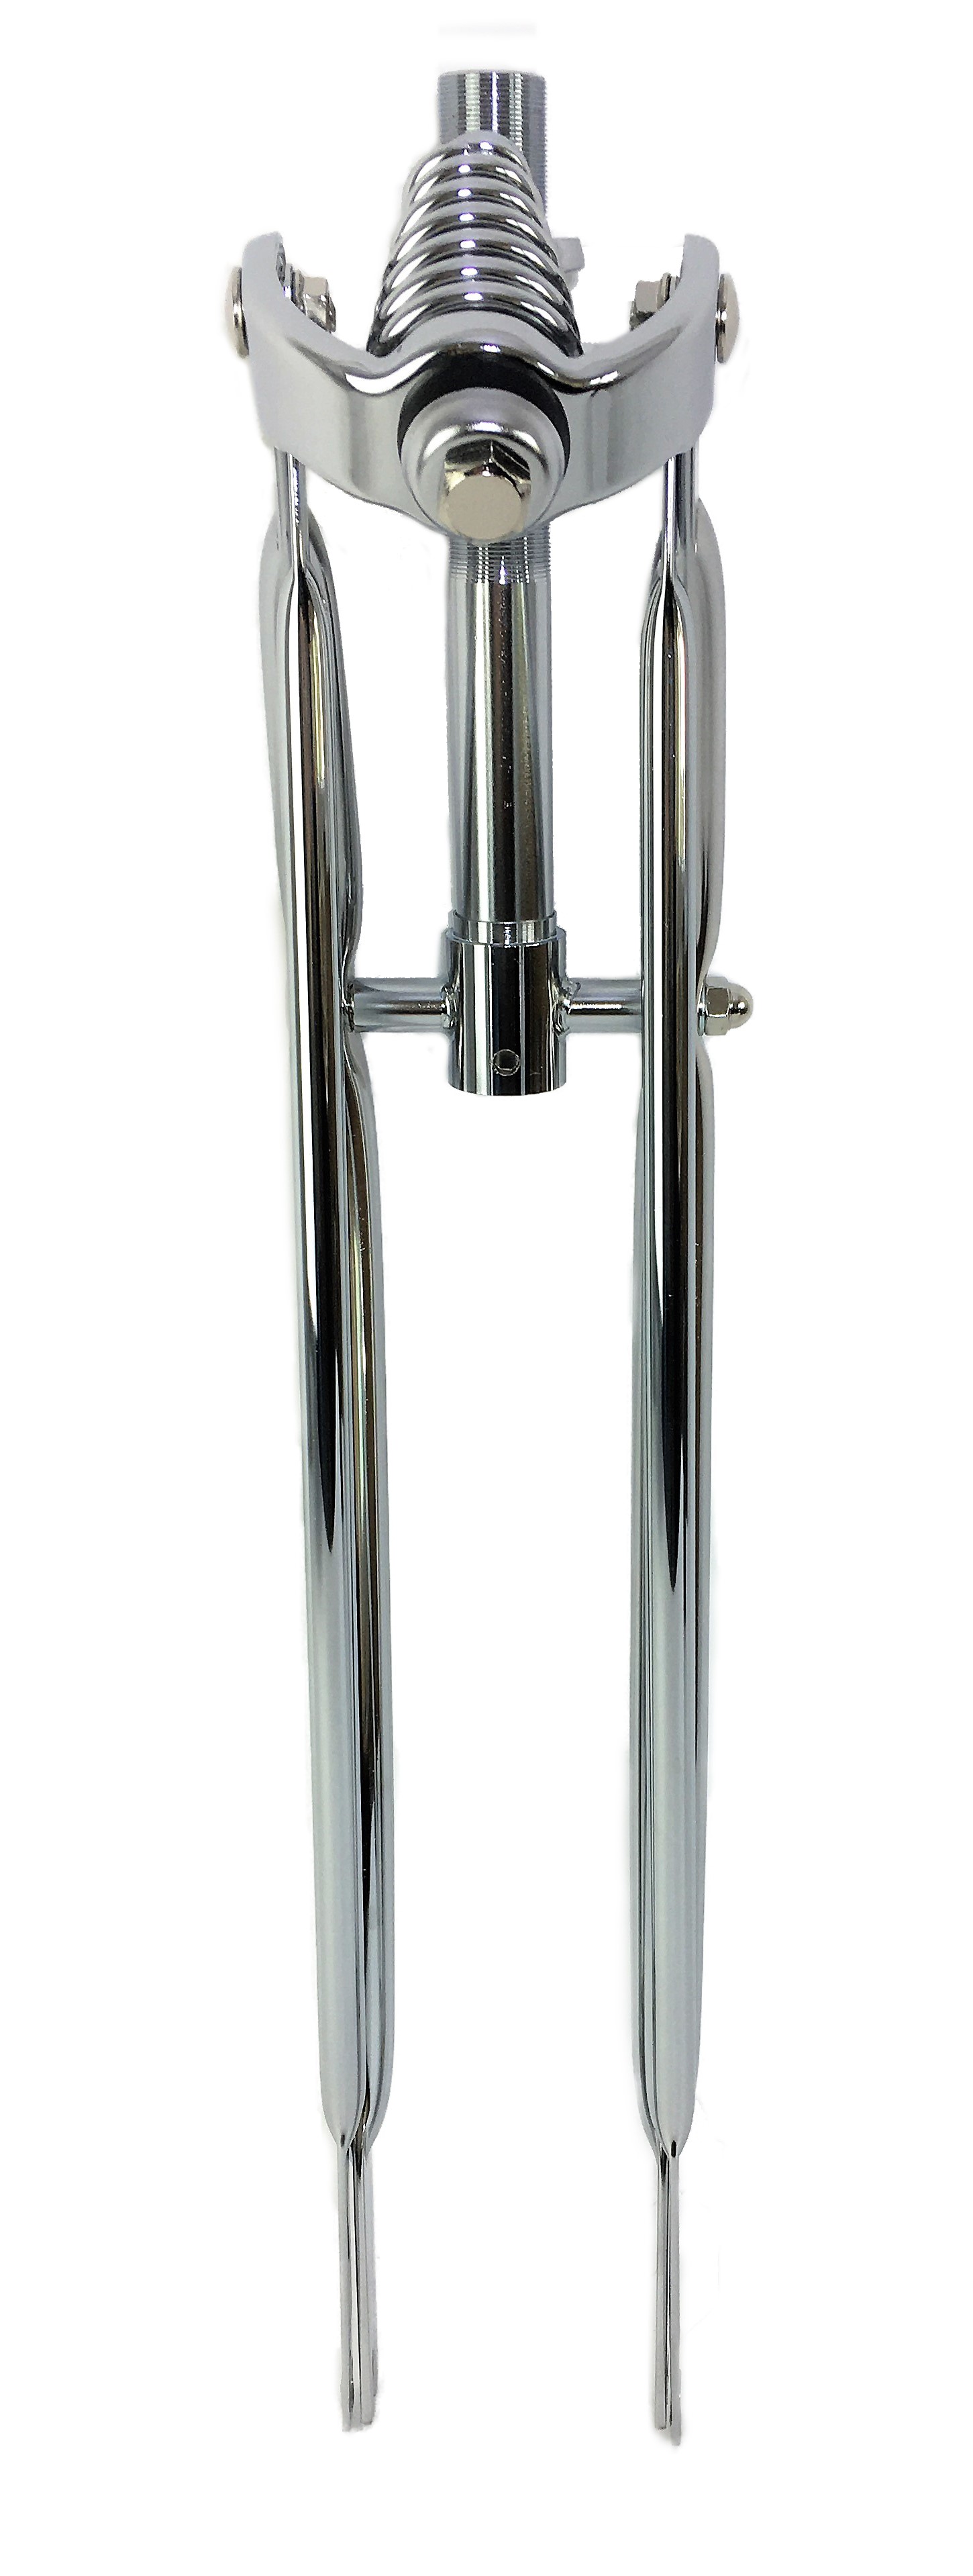 Springer Fork 26 inch. without Cantilevers